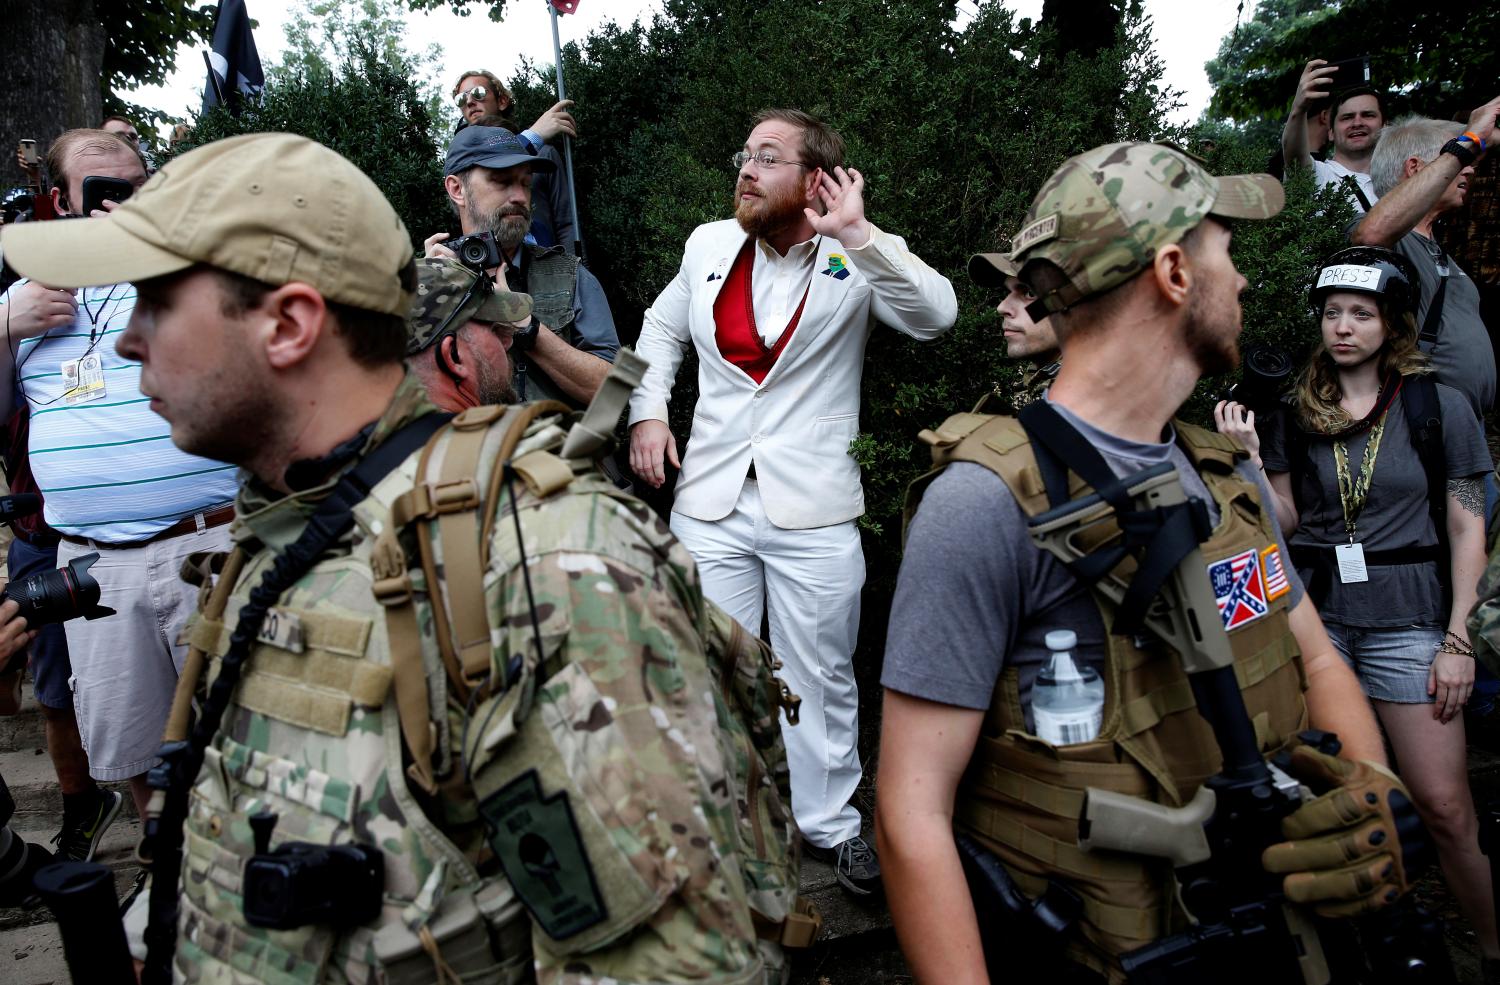 A white nationalist stands behind militia members after he scuffled with a counter demonstrator in Charlottesville, Virginia, U.S., August 12, 2017. REUTERS/Joshua Roberts - RC164F32C360